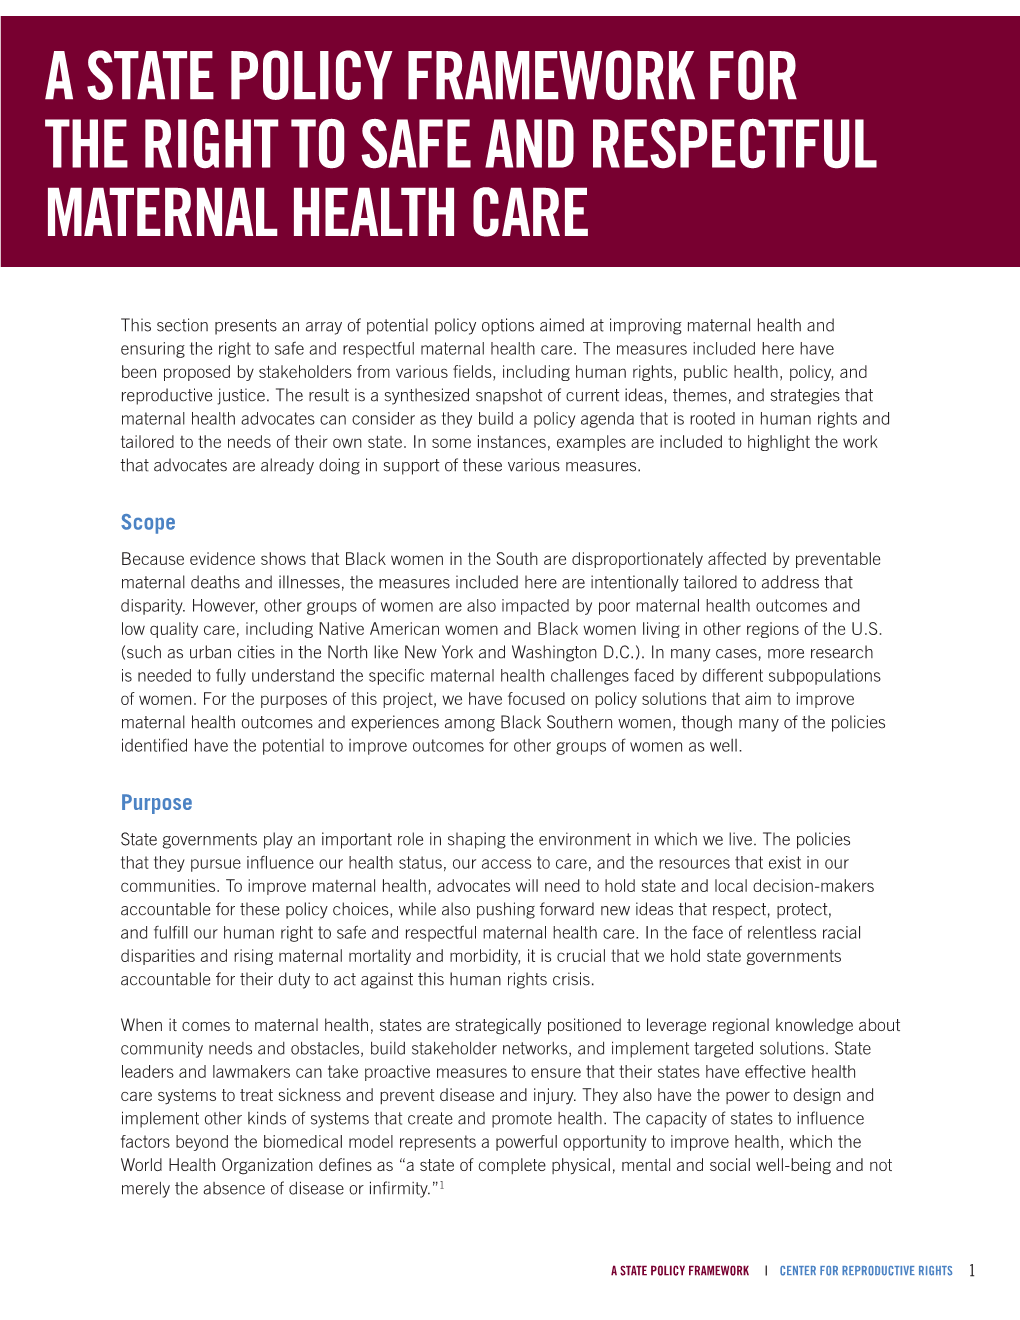 A State Policy Framework for the Right to Safe and Respectful Maternal Health Care